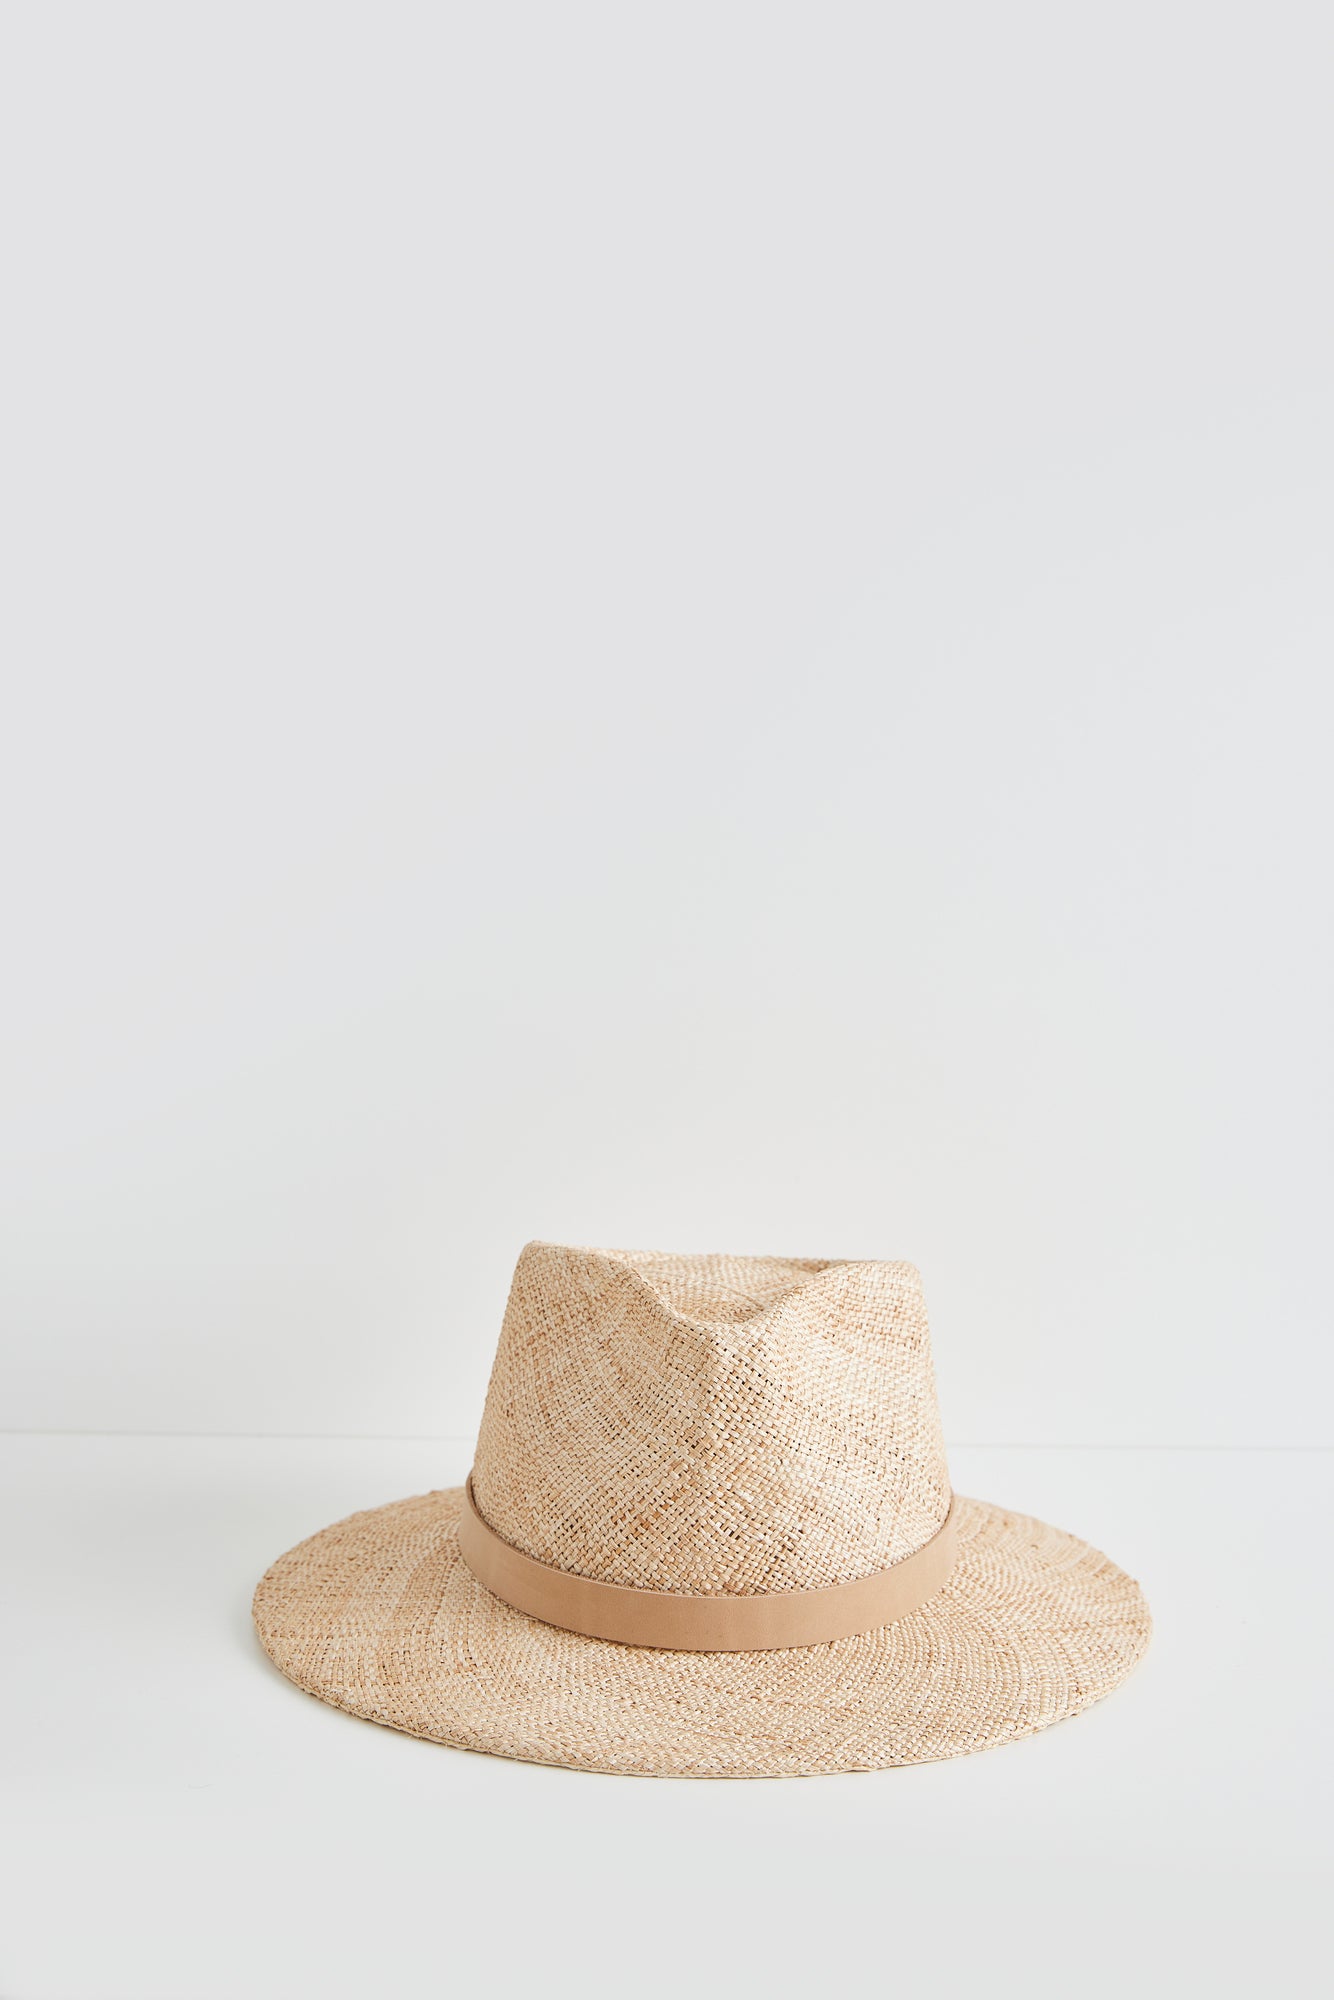 Vermisson - Natural straw with tan leather trim